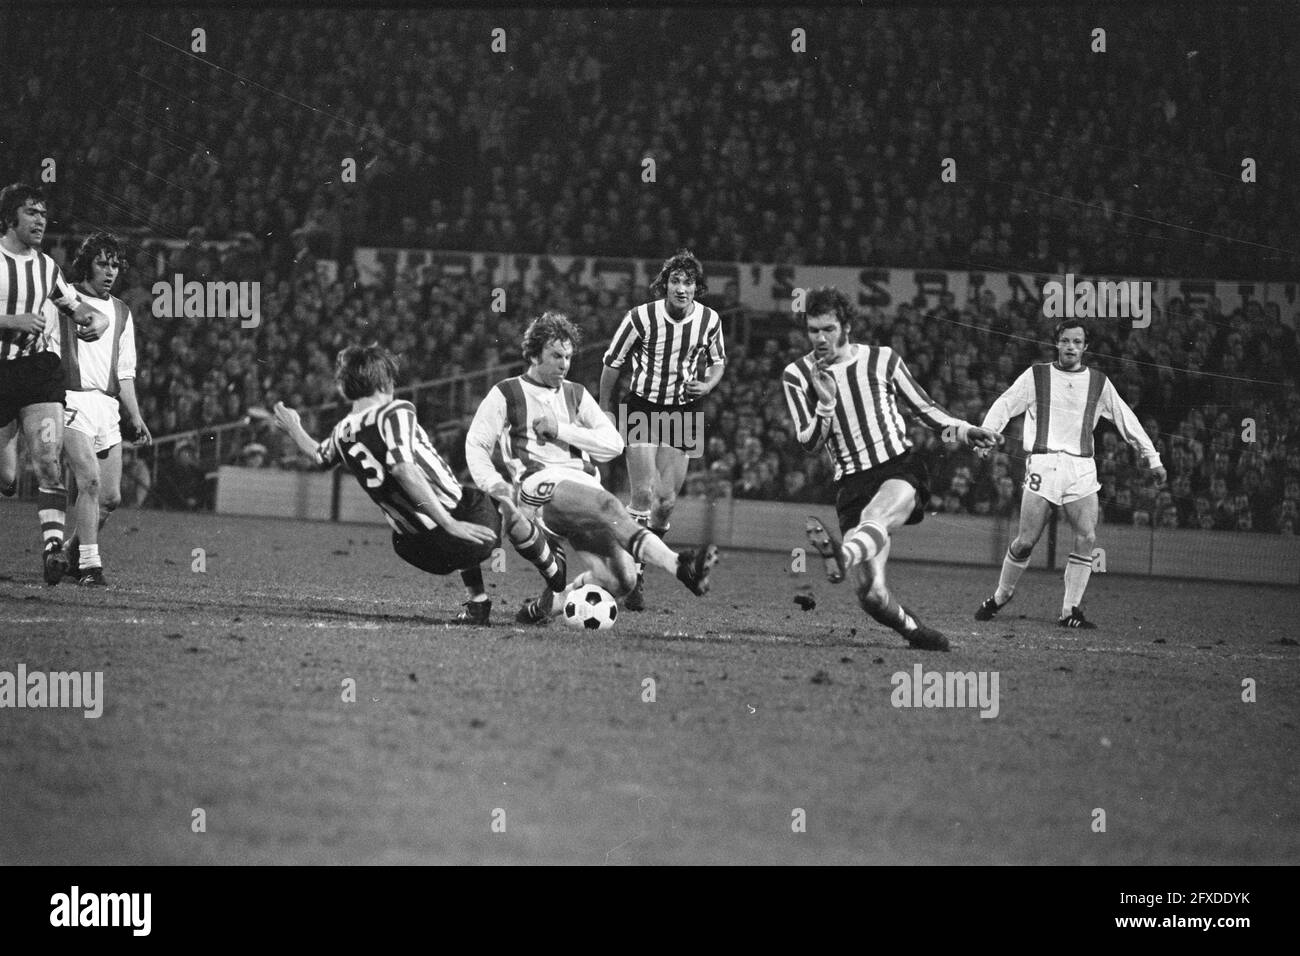 Knvb cup quarter final Black and White Stock Photos & Images - Alamy